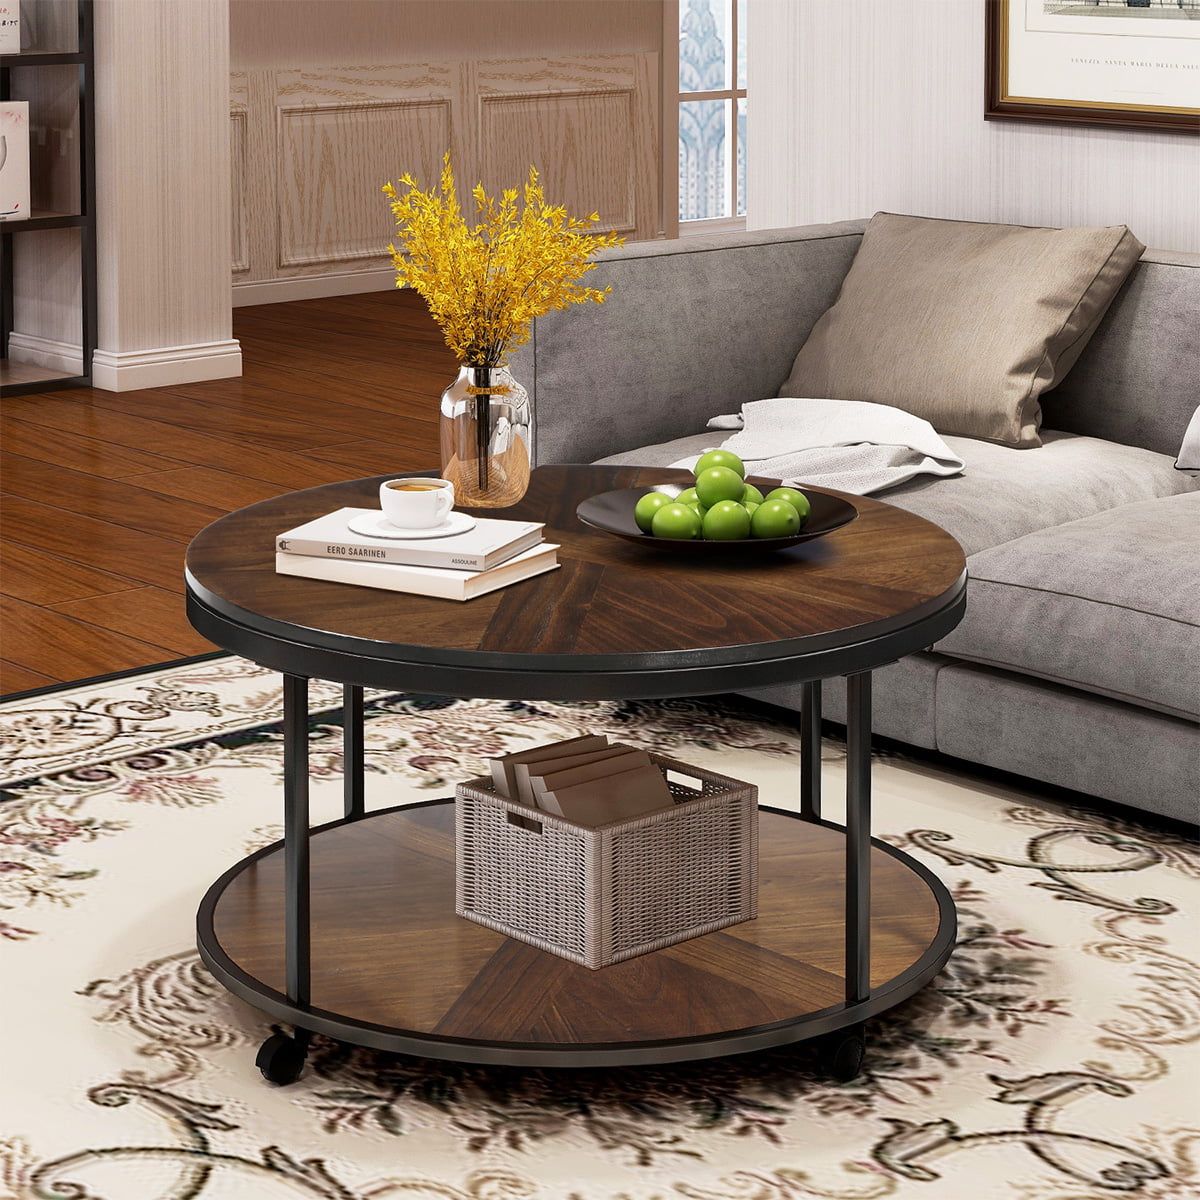 Sentern Round Coffee Table With Caster Wheels And Unique Textured Regarding Round Coffee Tables With Storage (View 11 of 15)